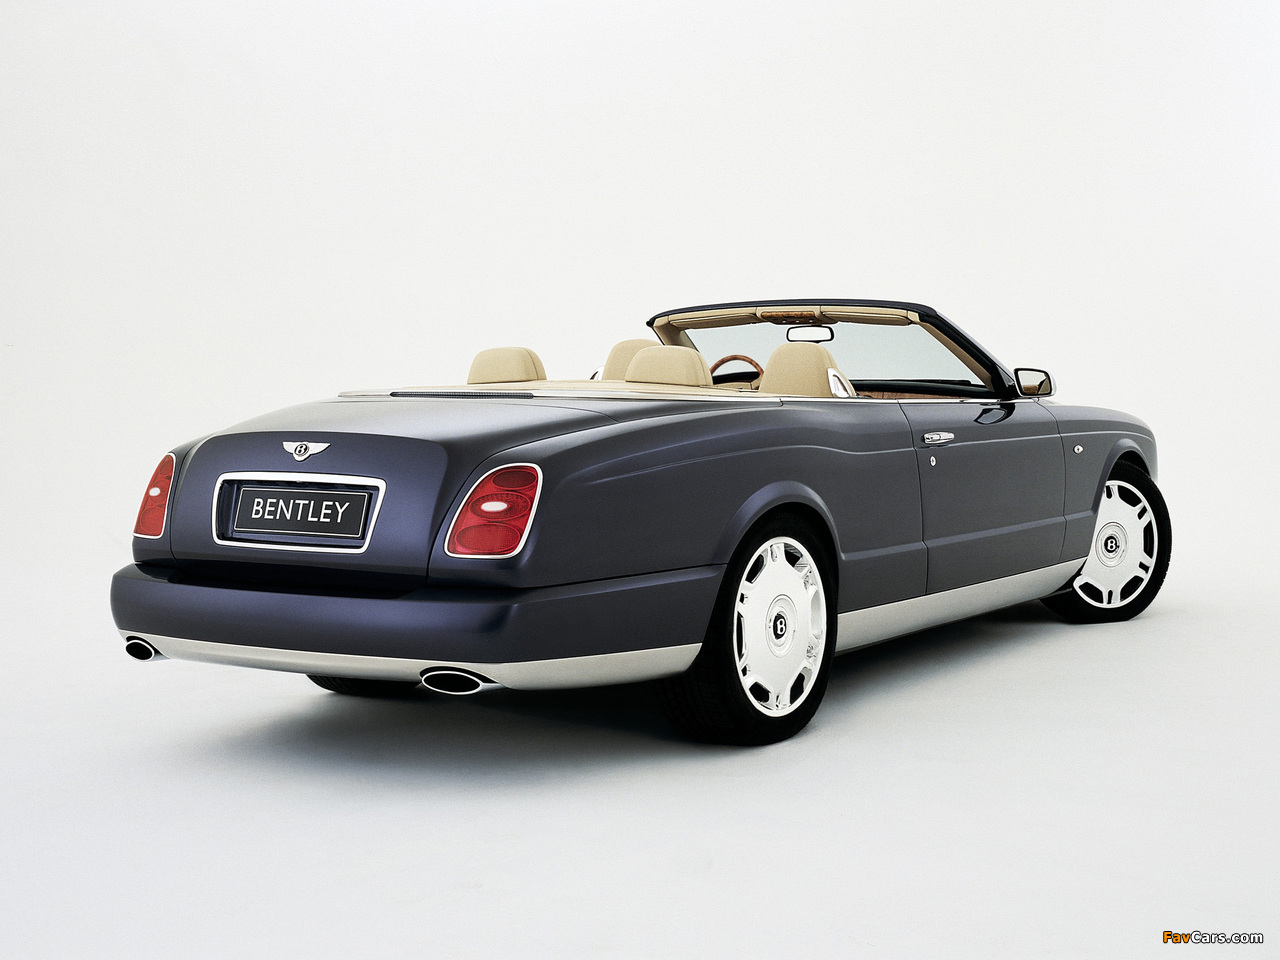 Bentley Arnage Drophead Coupe Concept 2005 pictures (1280 x 960)